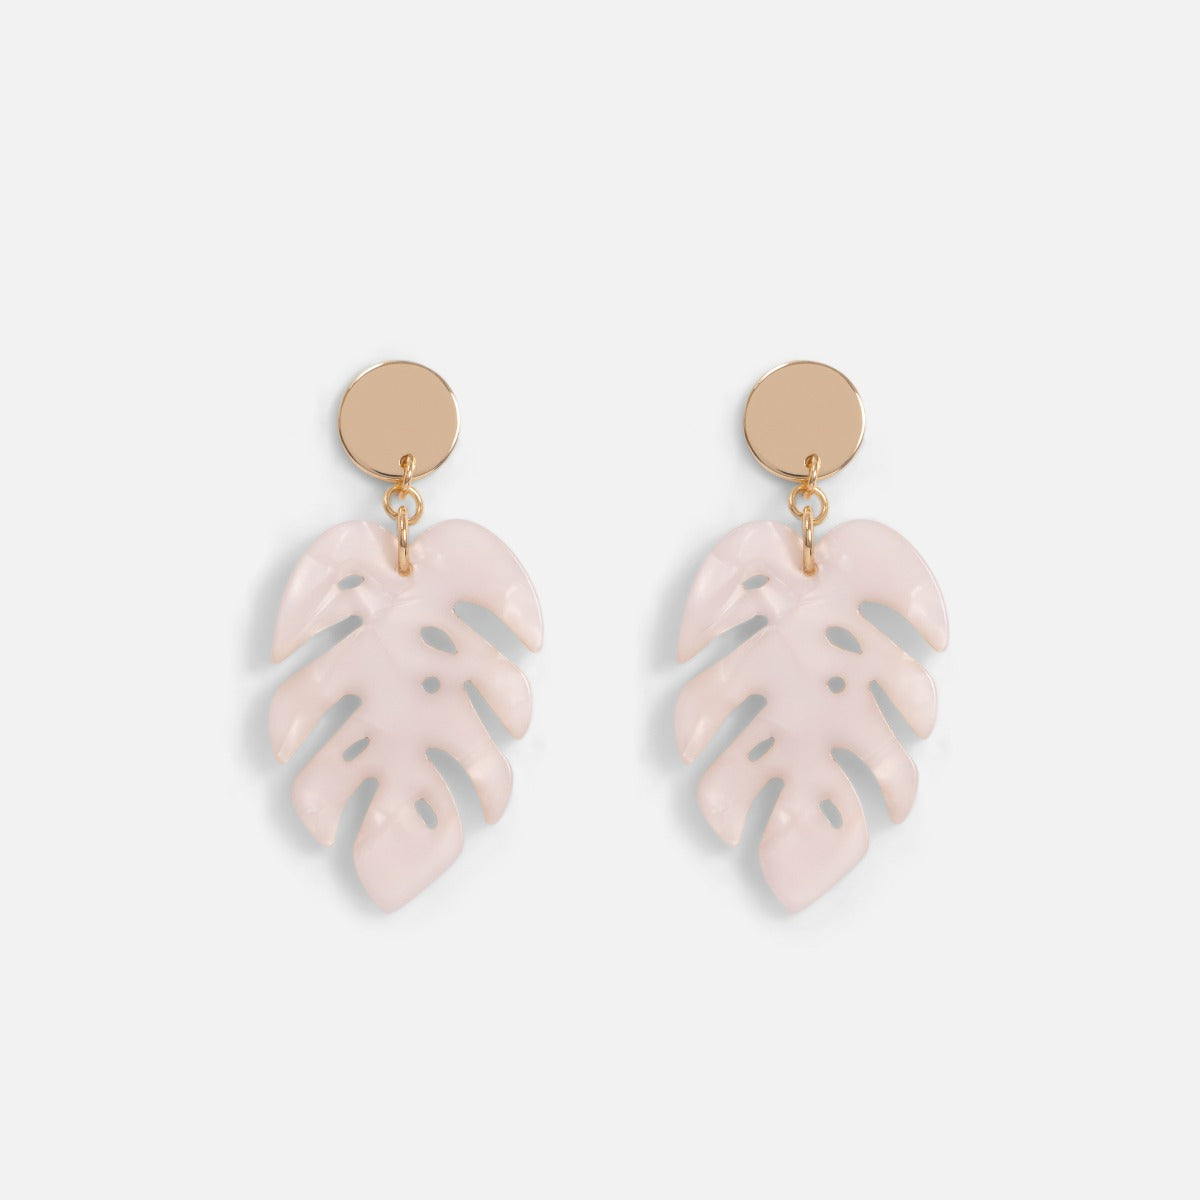 Long golden earrings with mother-of-pearl palm tree leave charm